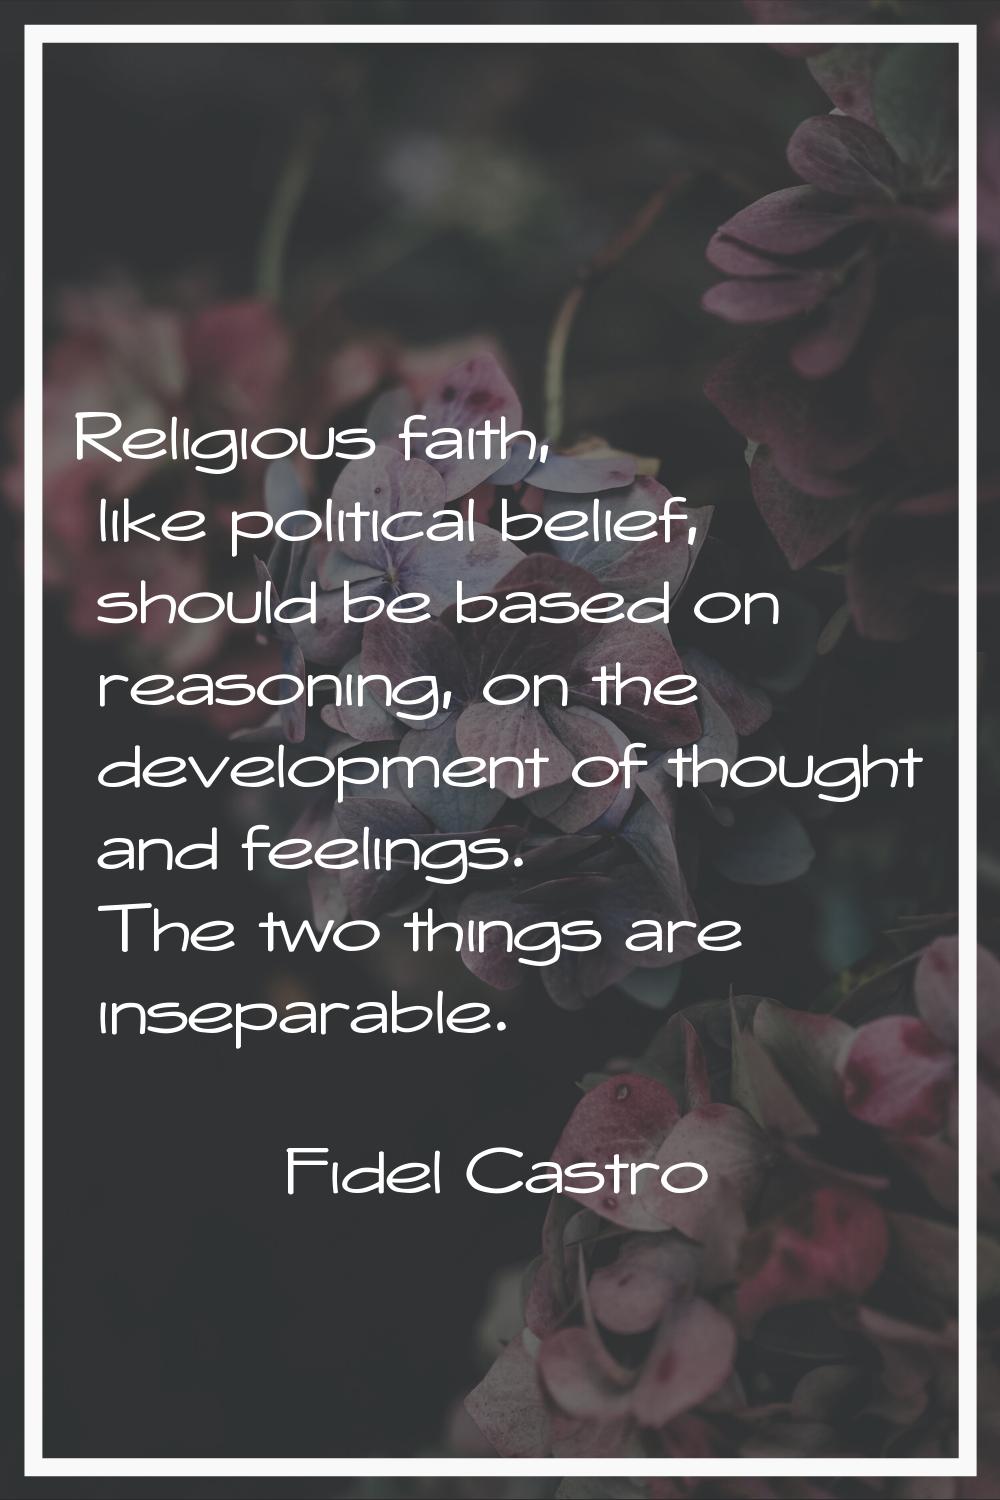 Religious faith, like political belief, should be based on reasoning, on the development of thought